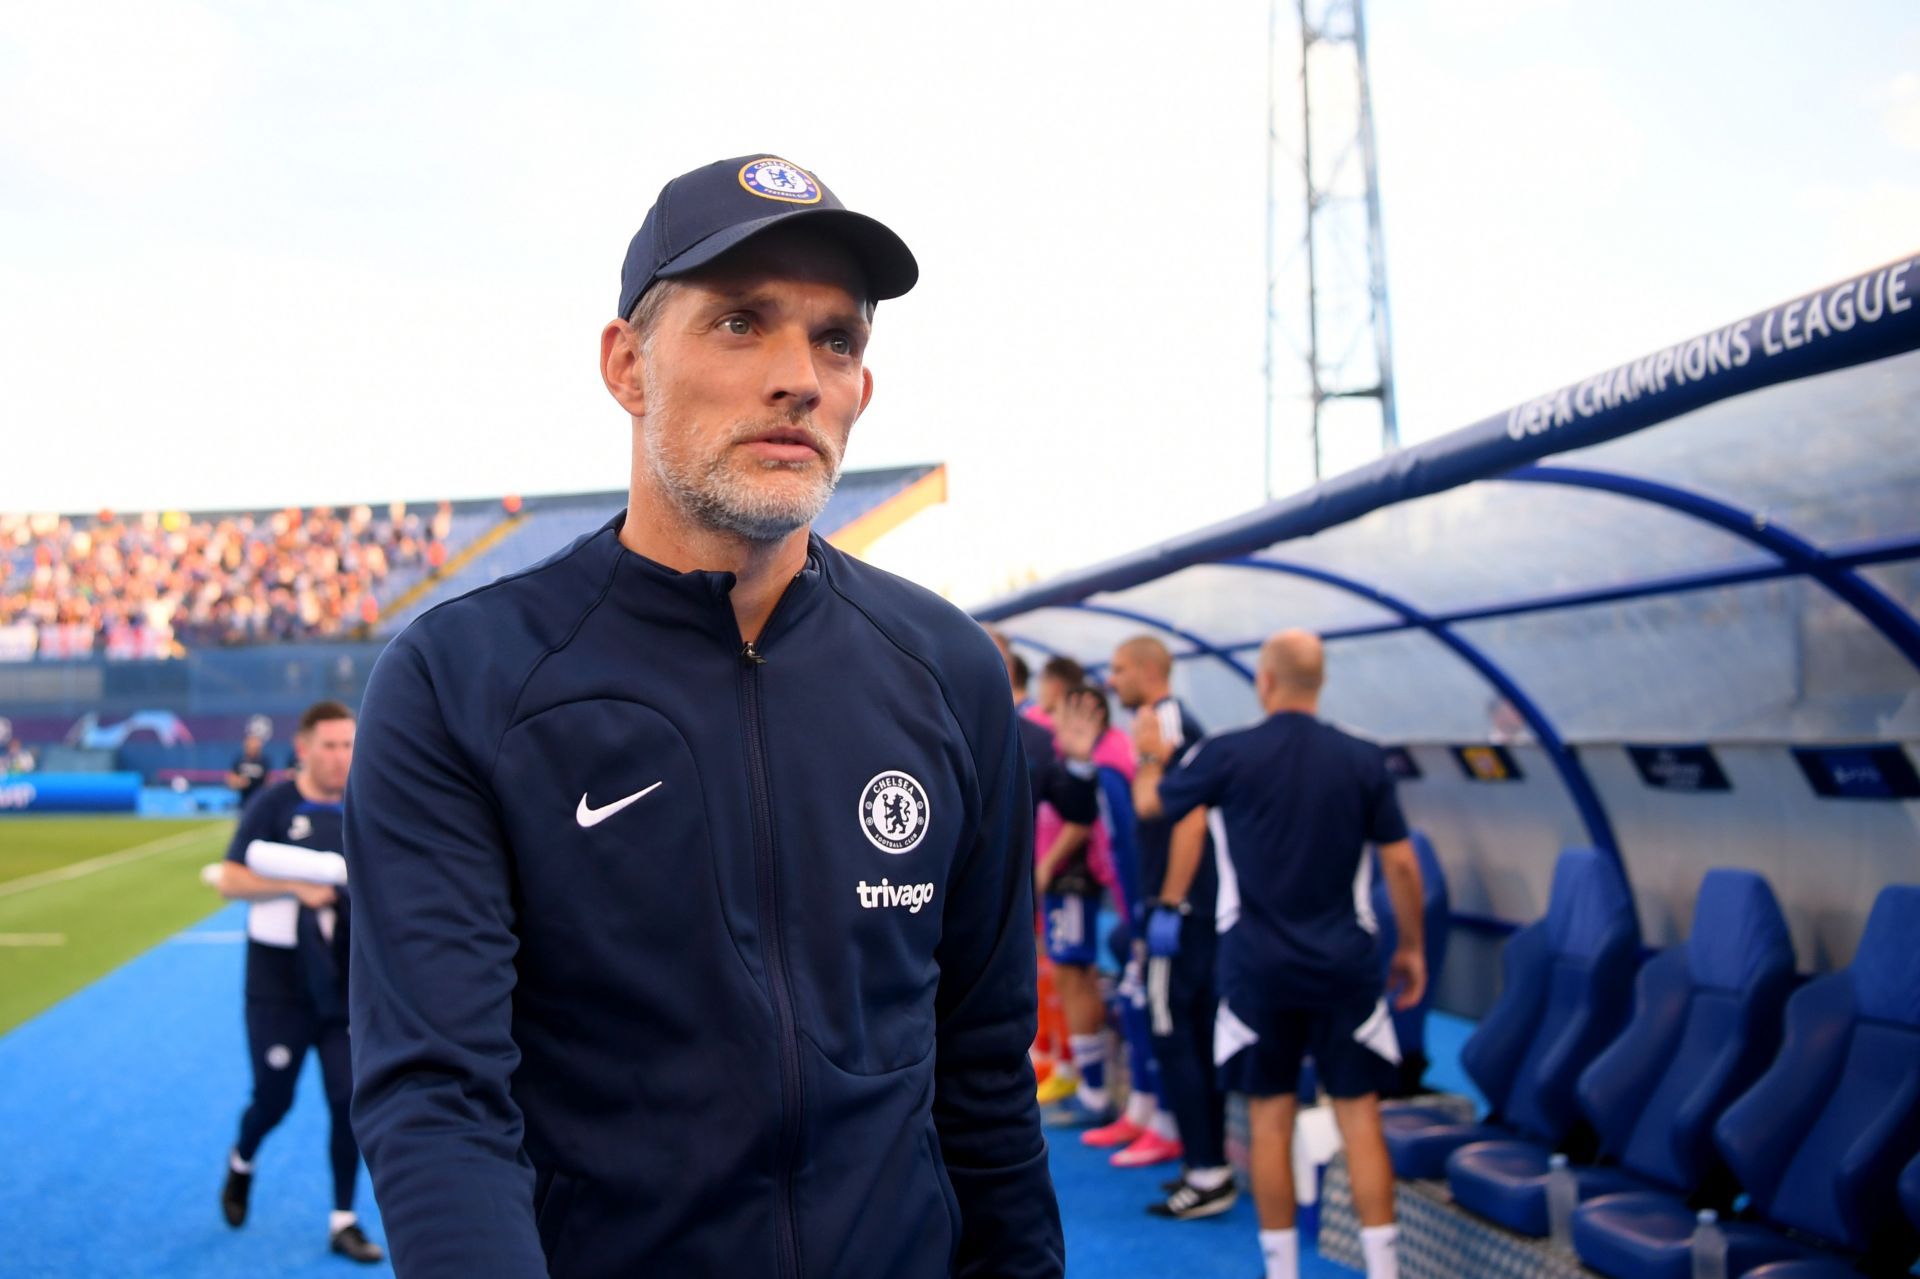 Tuchel also has his eyes on the job